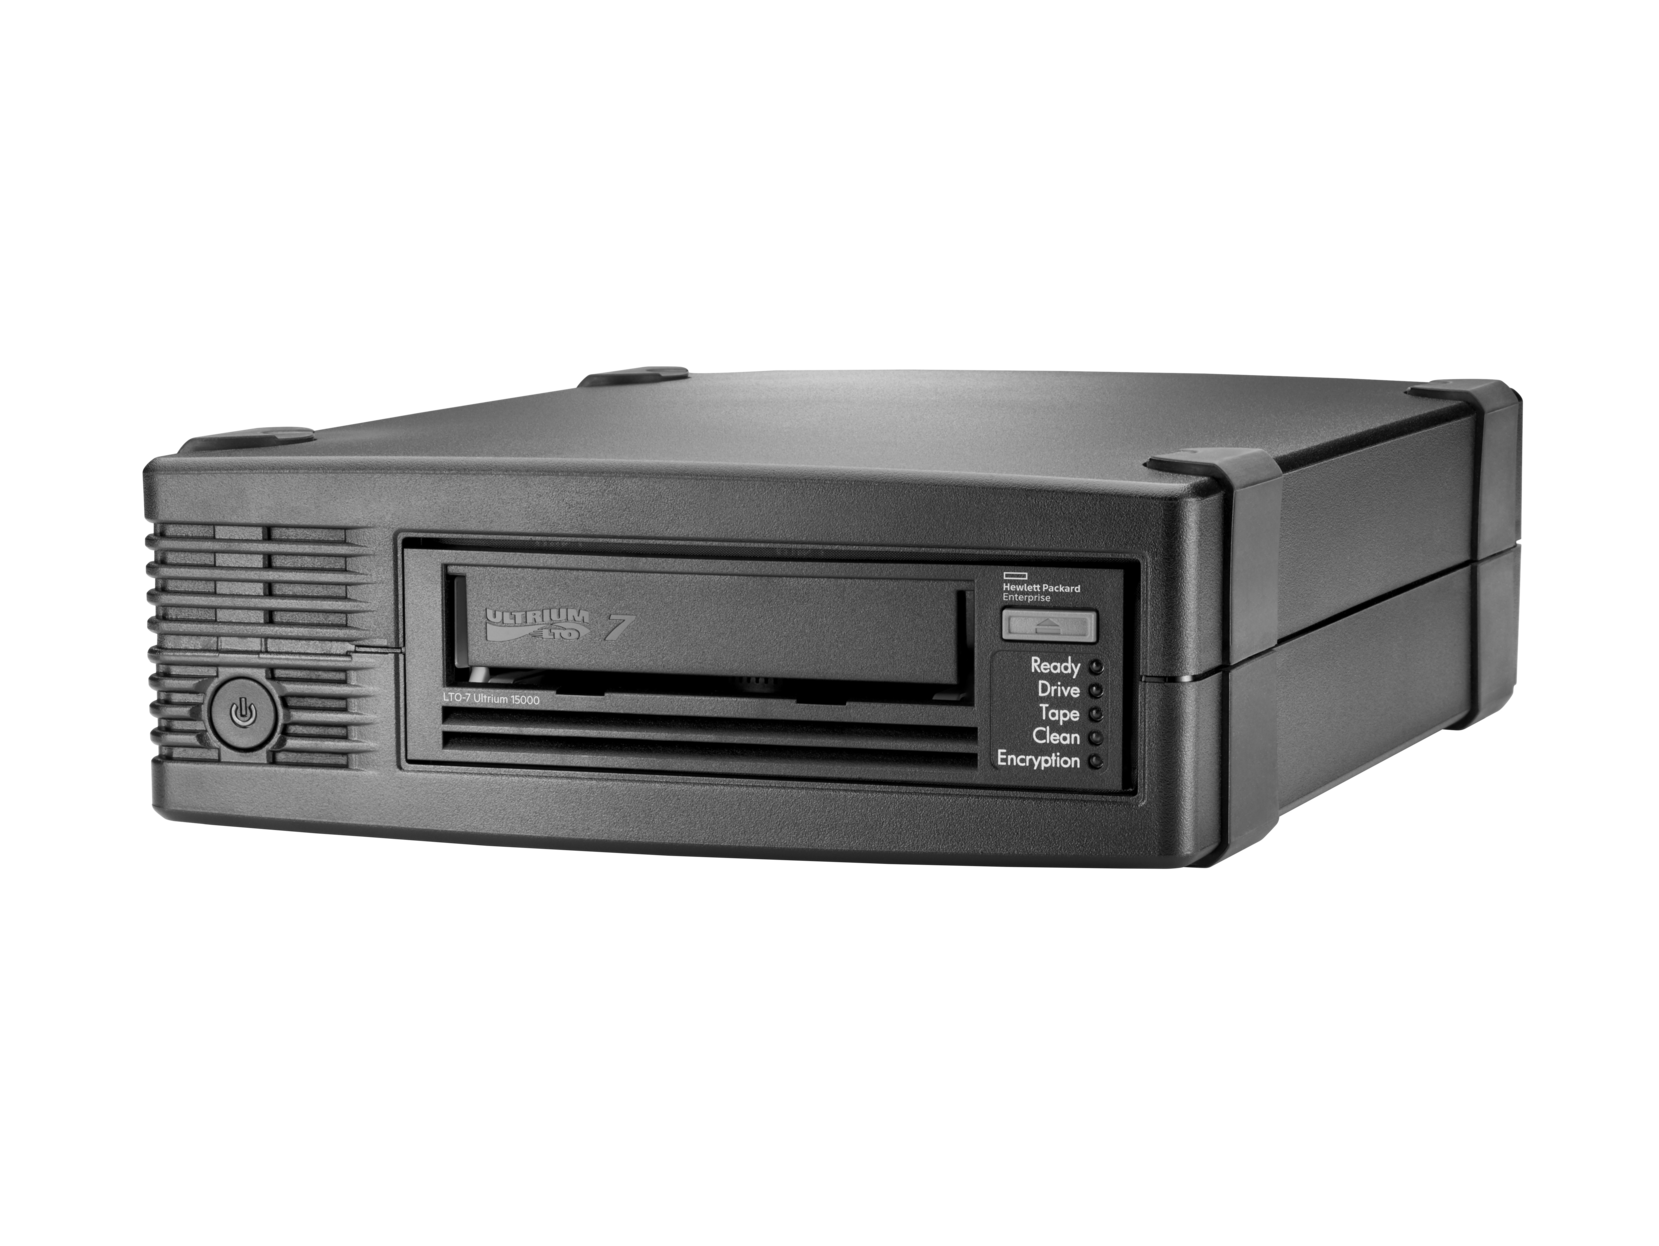 HPE BB874A StoreEver LTO-7 Ultrium 15000 External Tape Drive